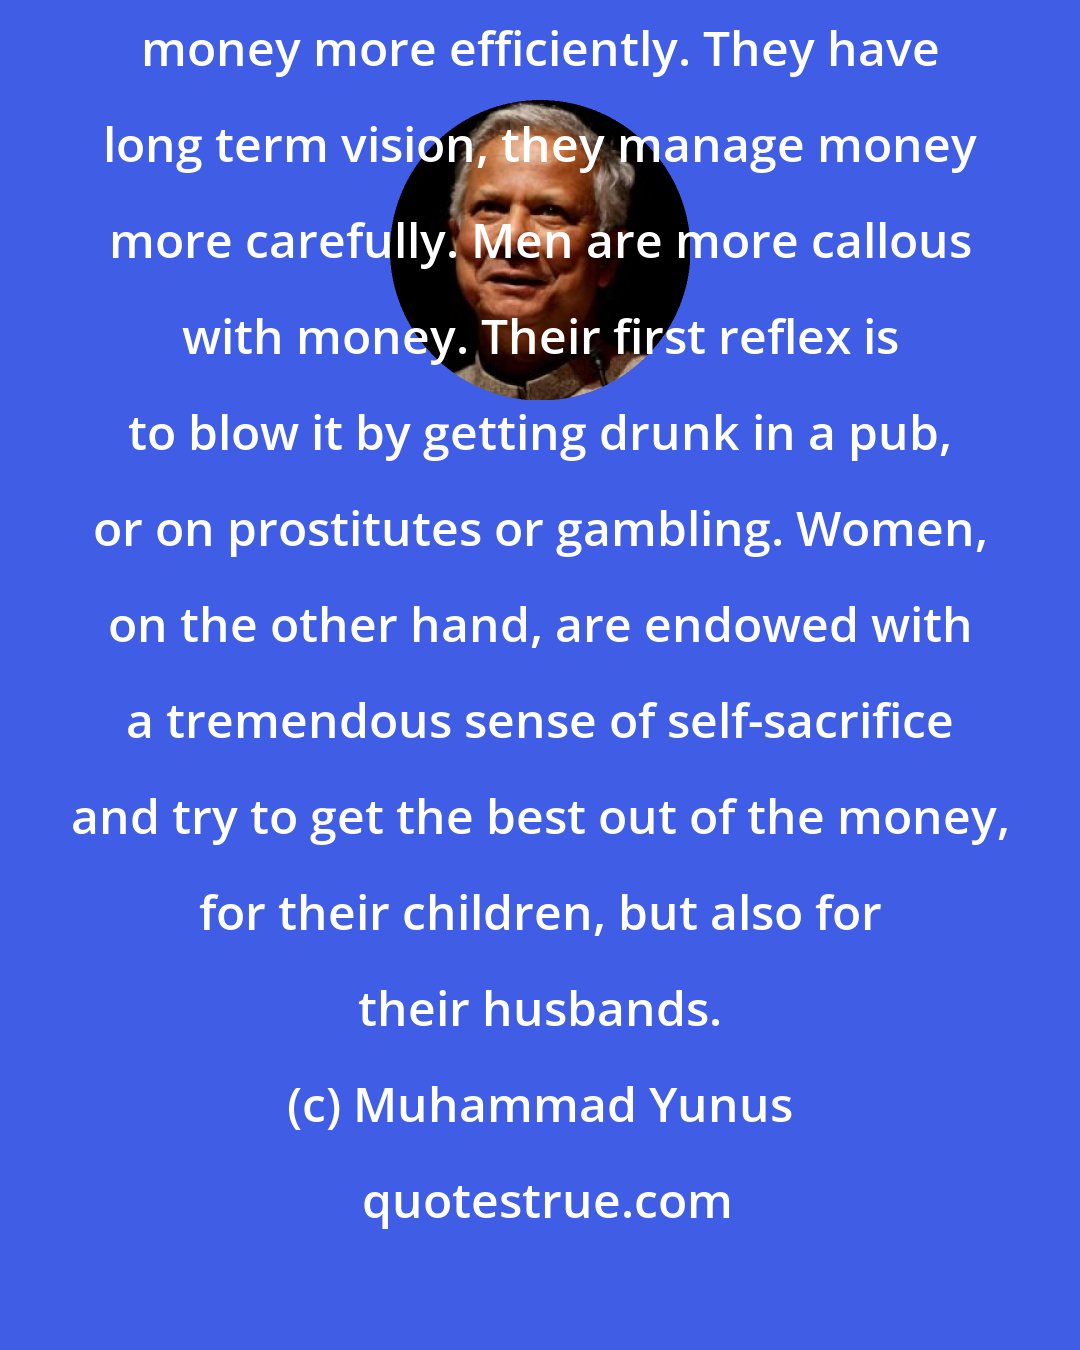 Muhammad Yunus: We certainly noted that when given the opportunity, women handle money more efficiently. They have long term vision, they manage money more carefully. Men are more callous with money. Their first reflex is to blow it by getting drunk in a pub, or on prostitutes or gambling. Women, on the other hand, are endowed with a tremendous sense of self-sacrifice and try to get the best out of the money, for their children, but also for their husbands.